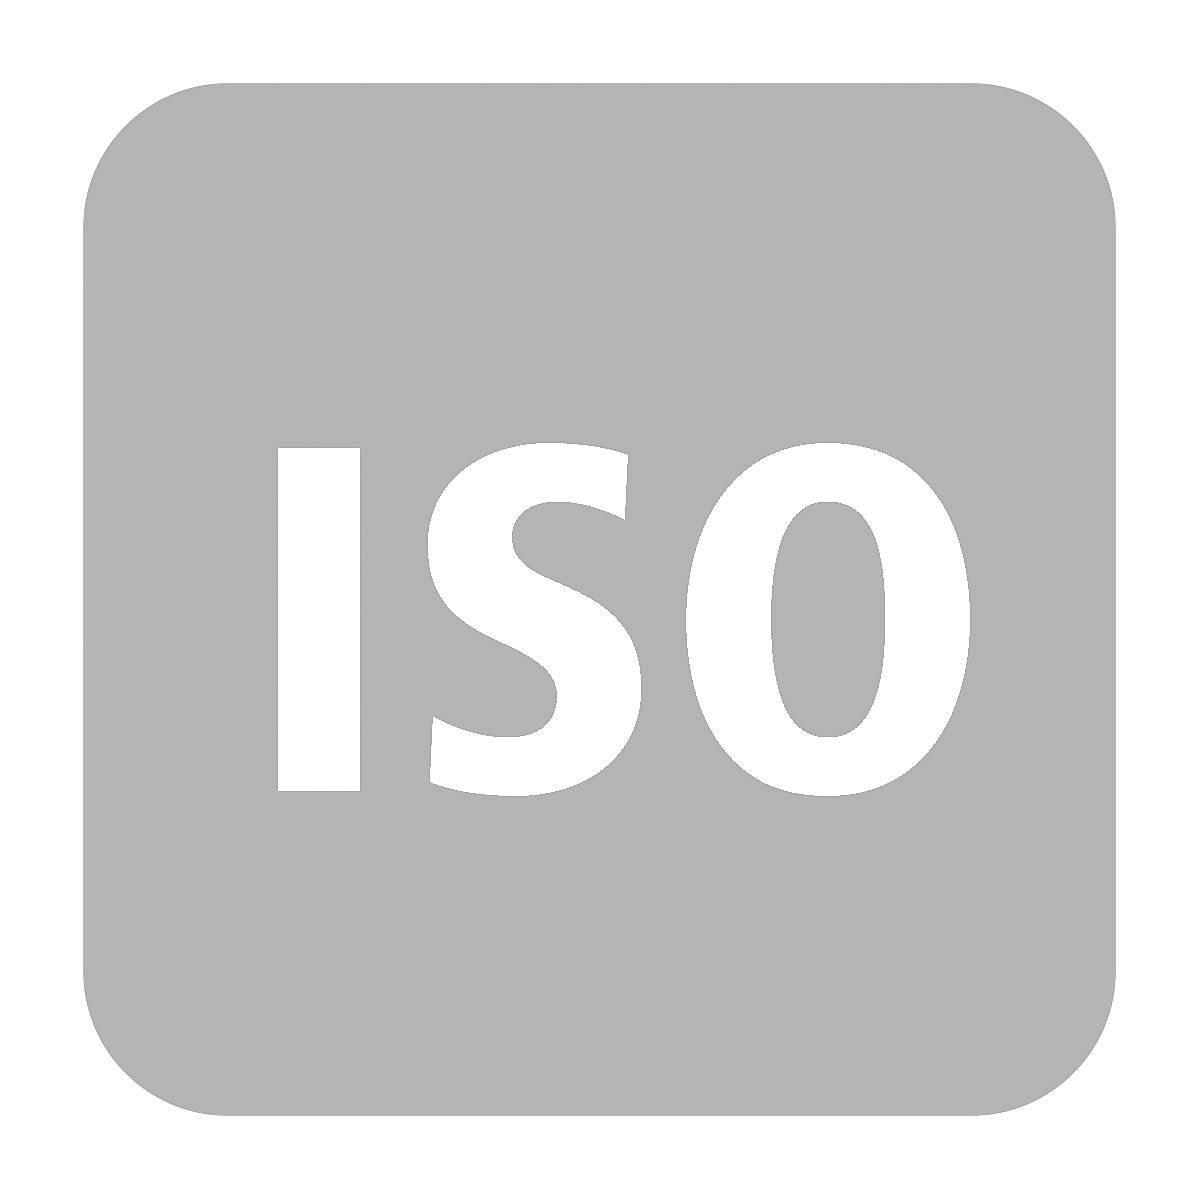 Extra cost for ISO model